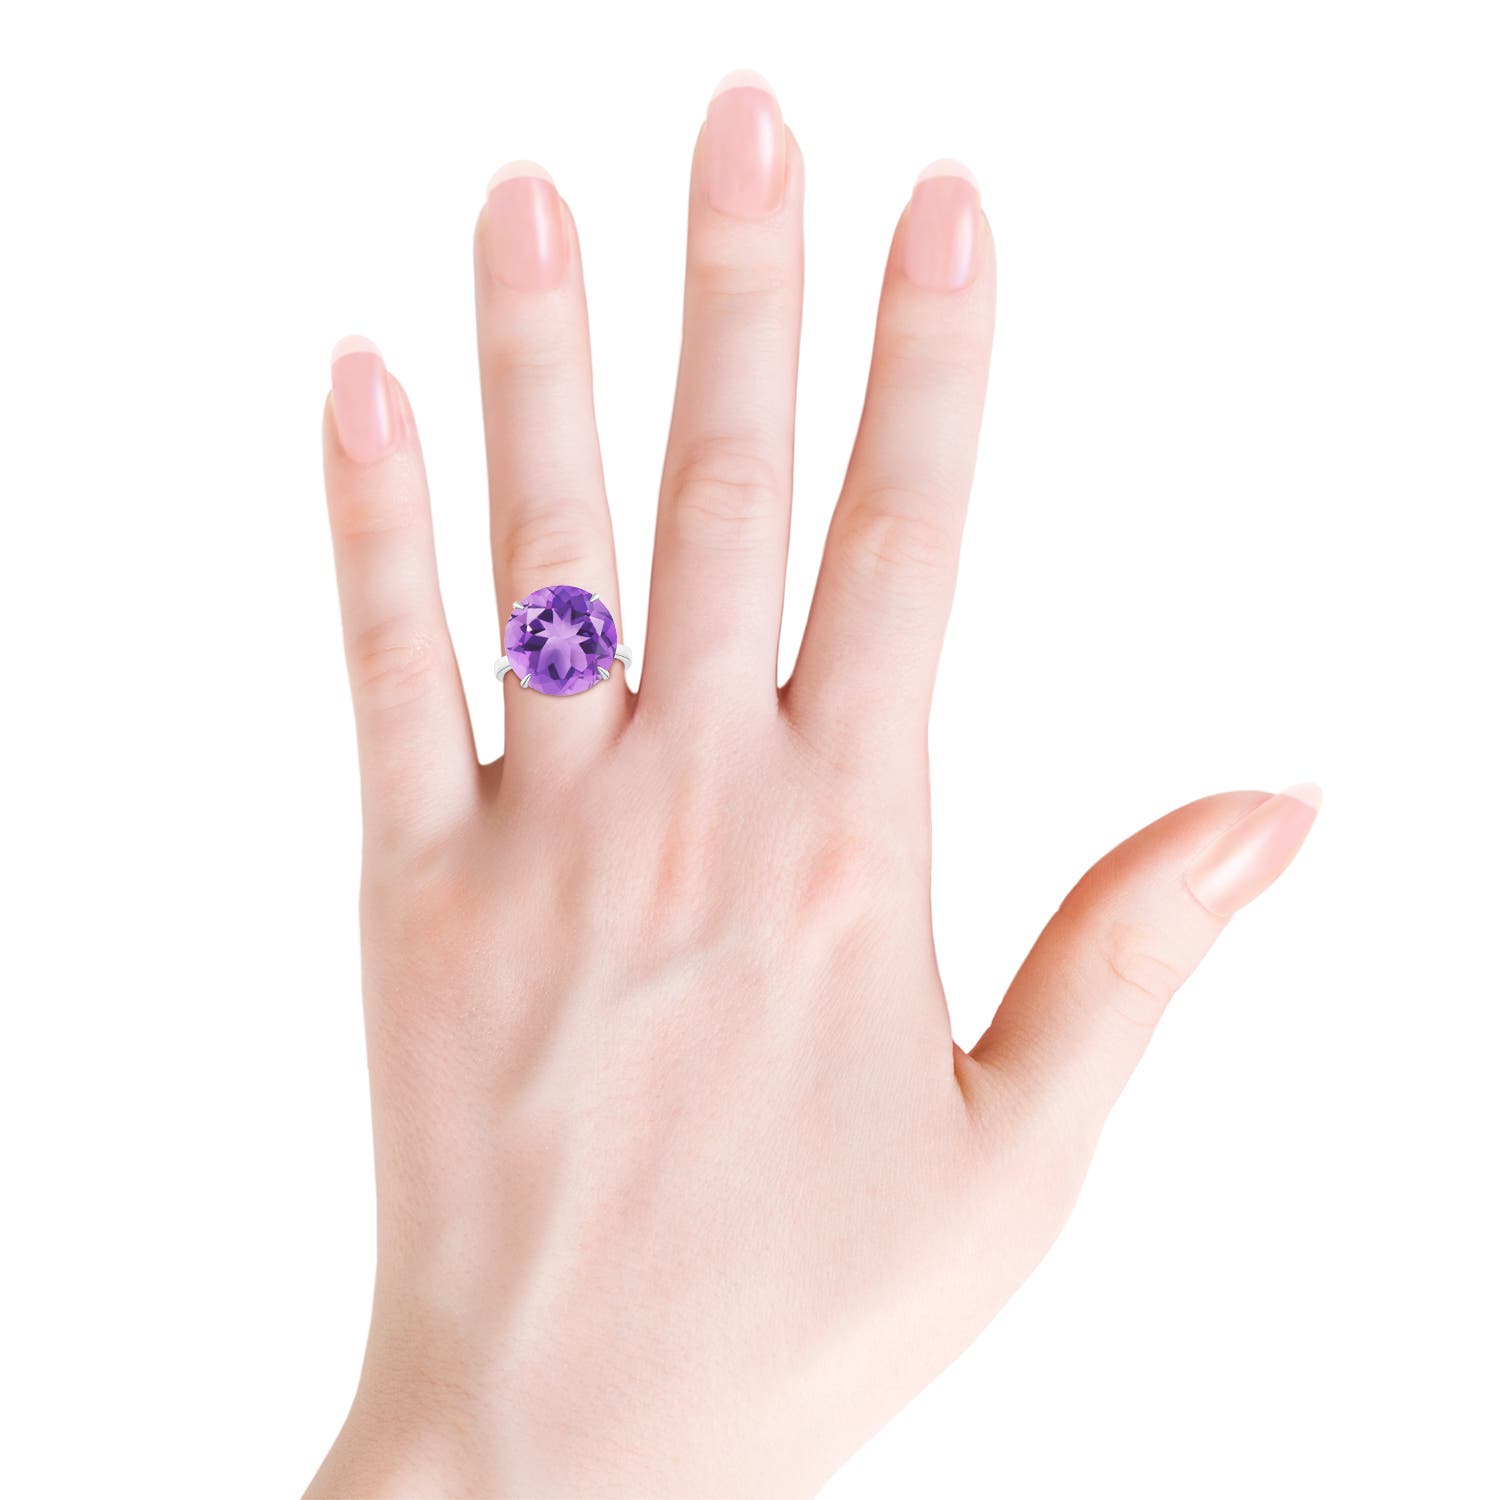 A- Amethyst / 11 CT / 14 KT White Gold